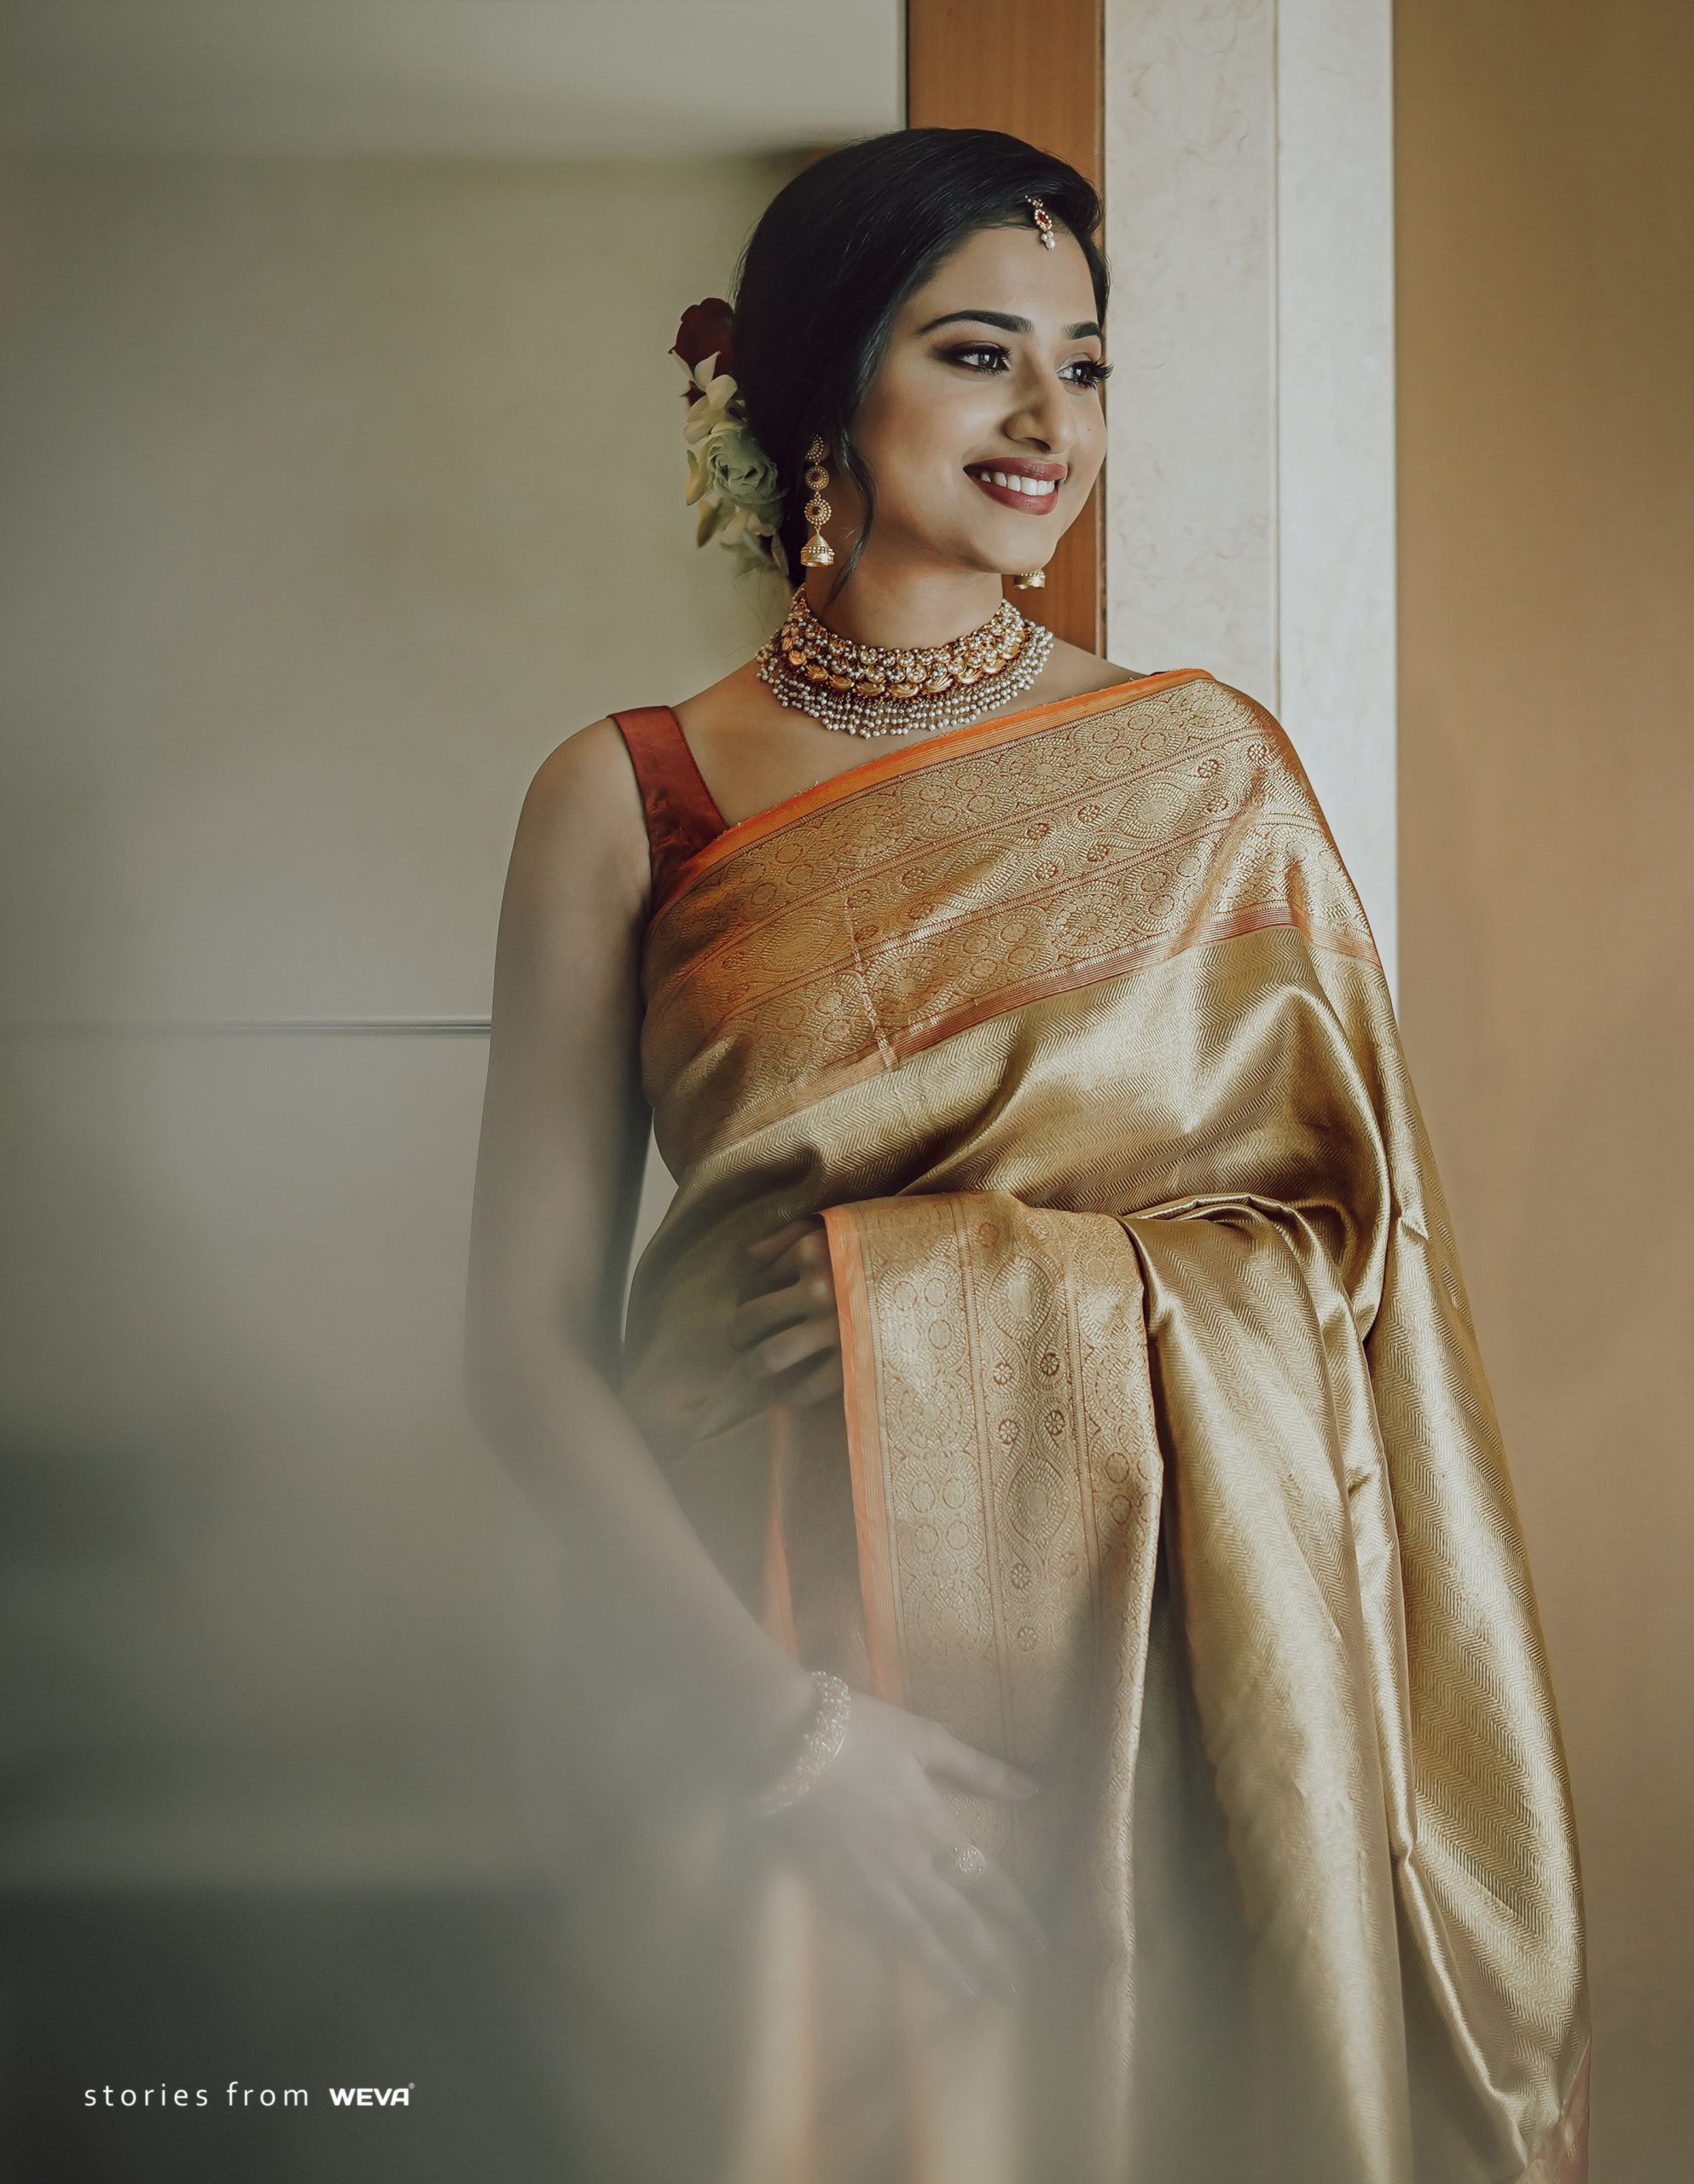 Blouse Designs For Silk Sarees: Bring Out The Beauty Of Your Silk